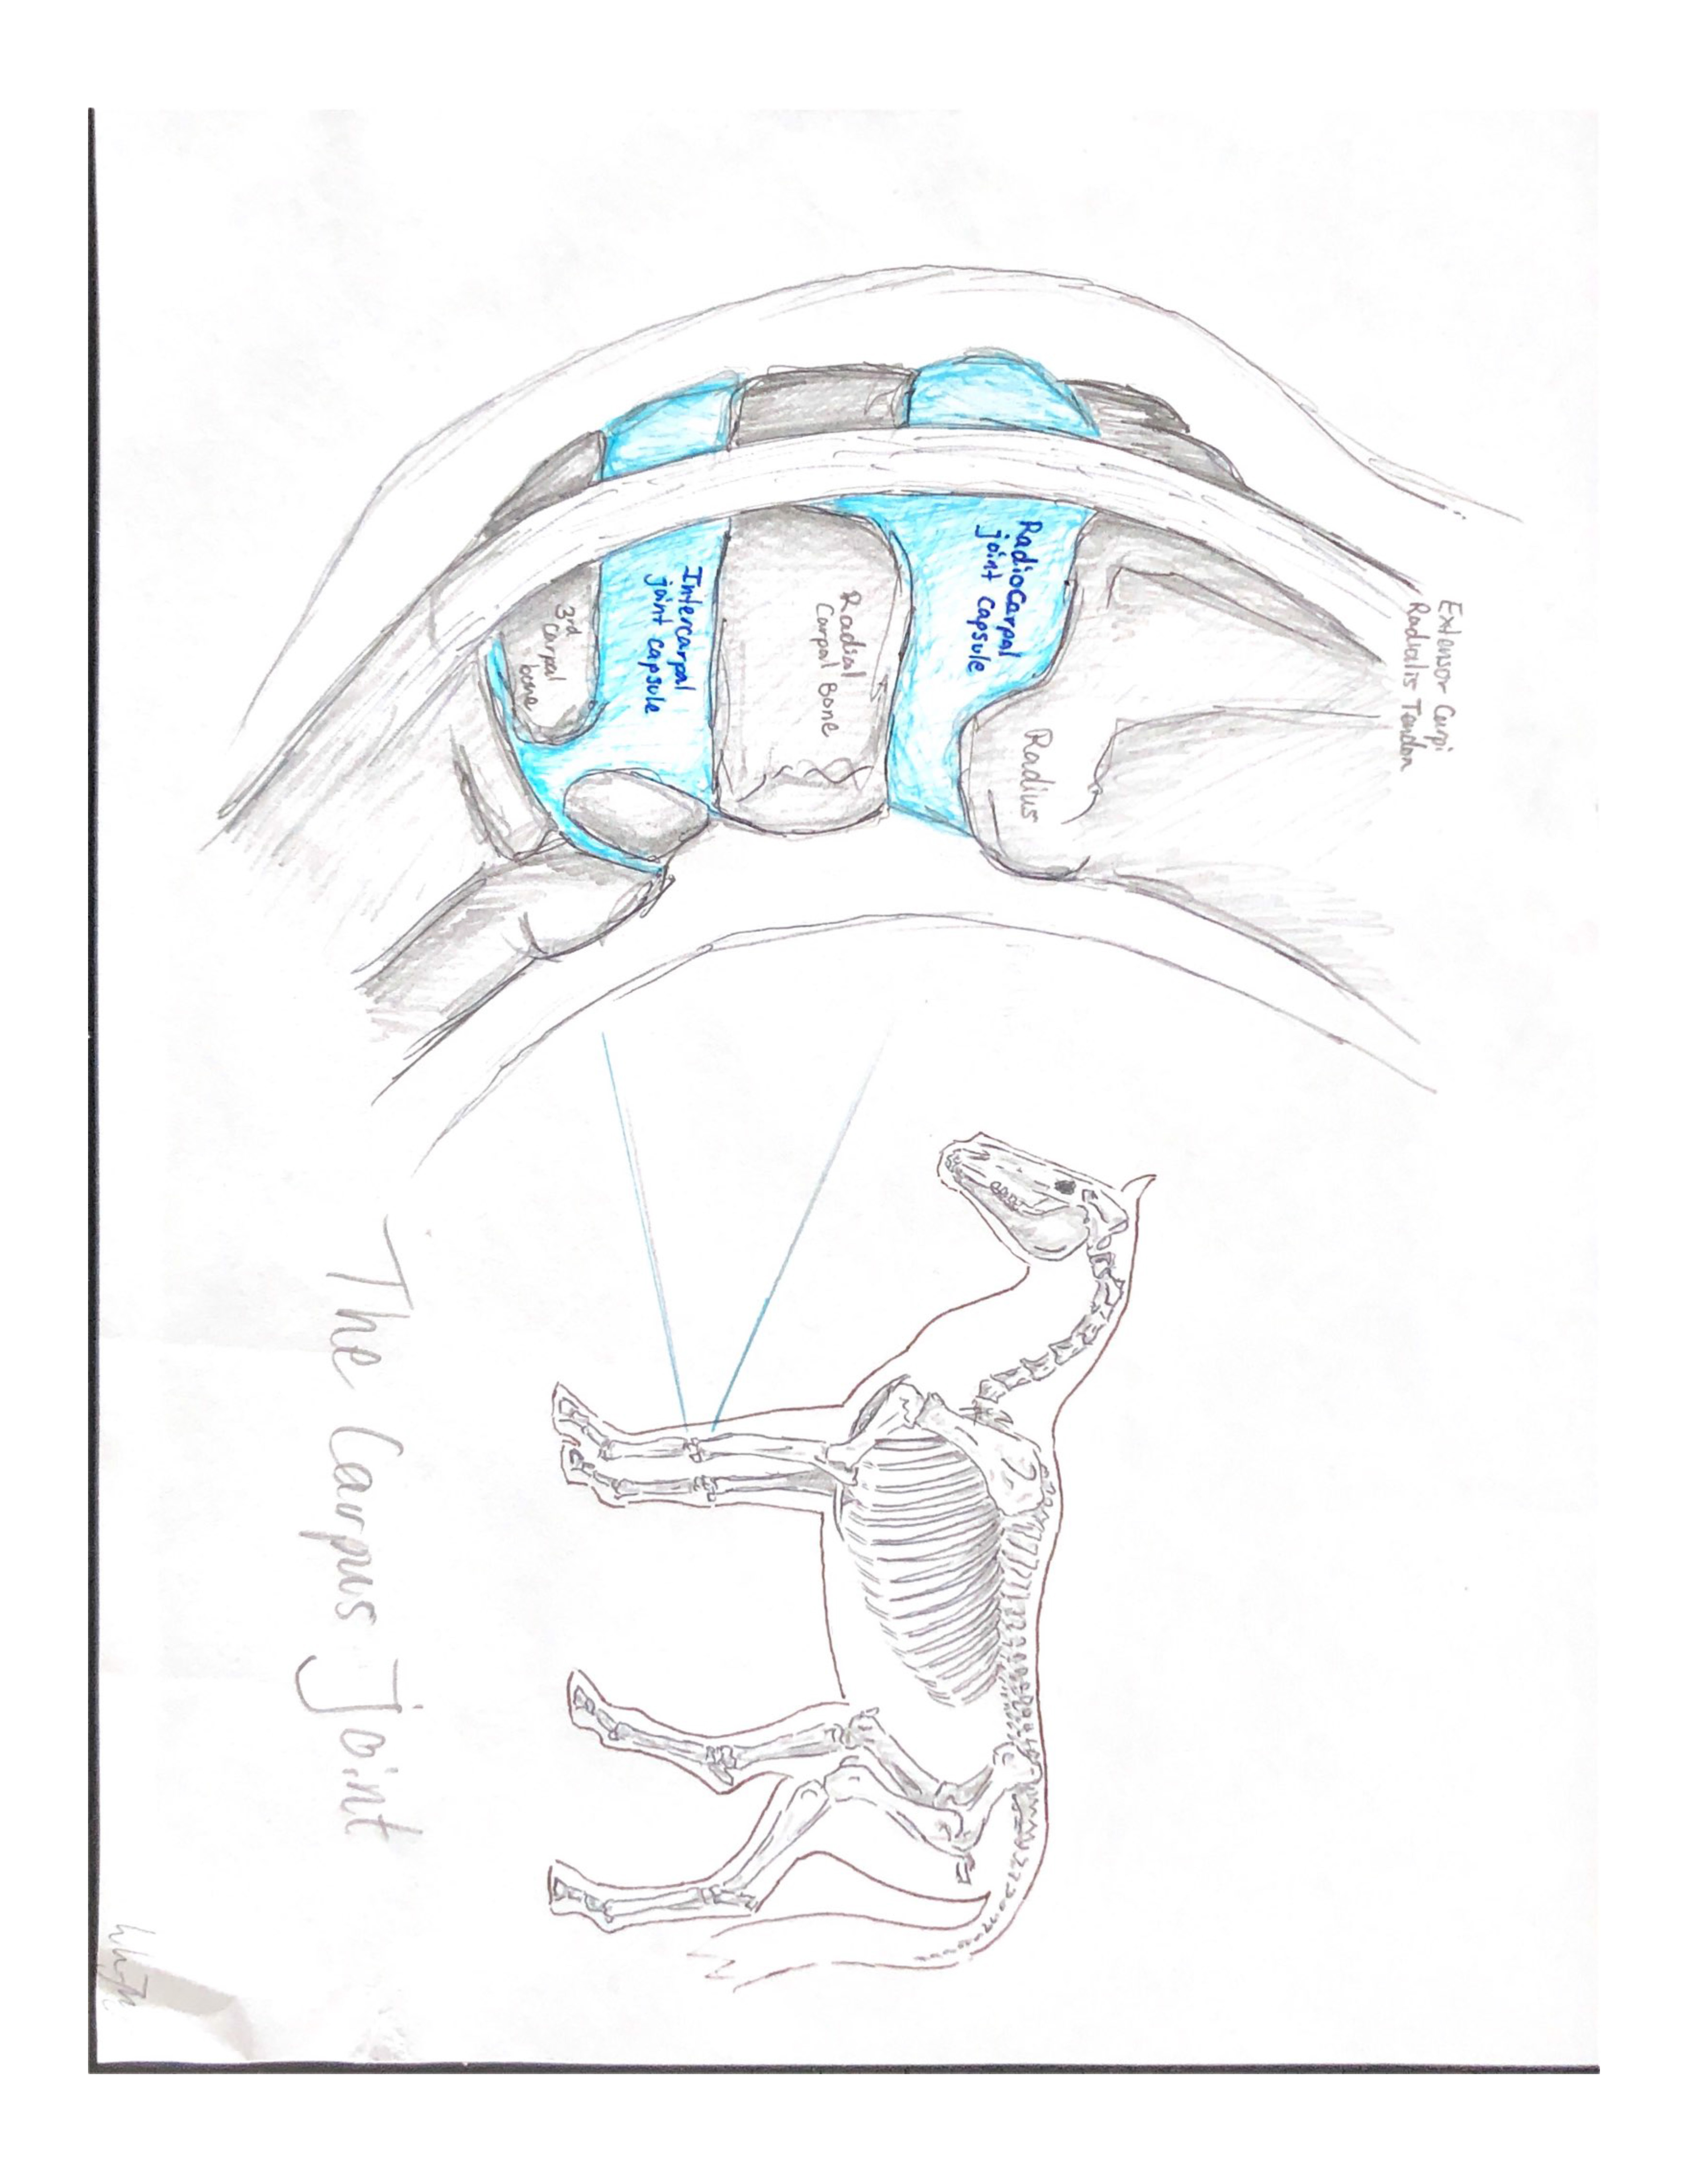 Drawing of equine carpus joint